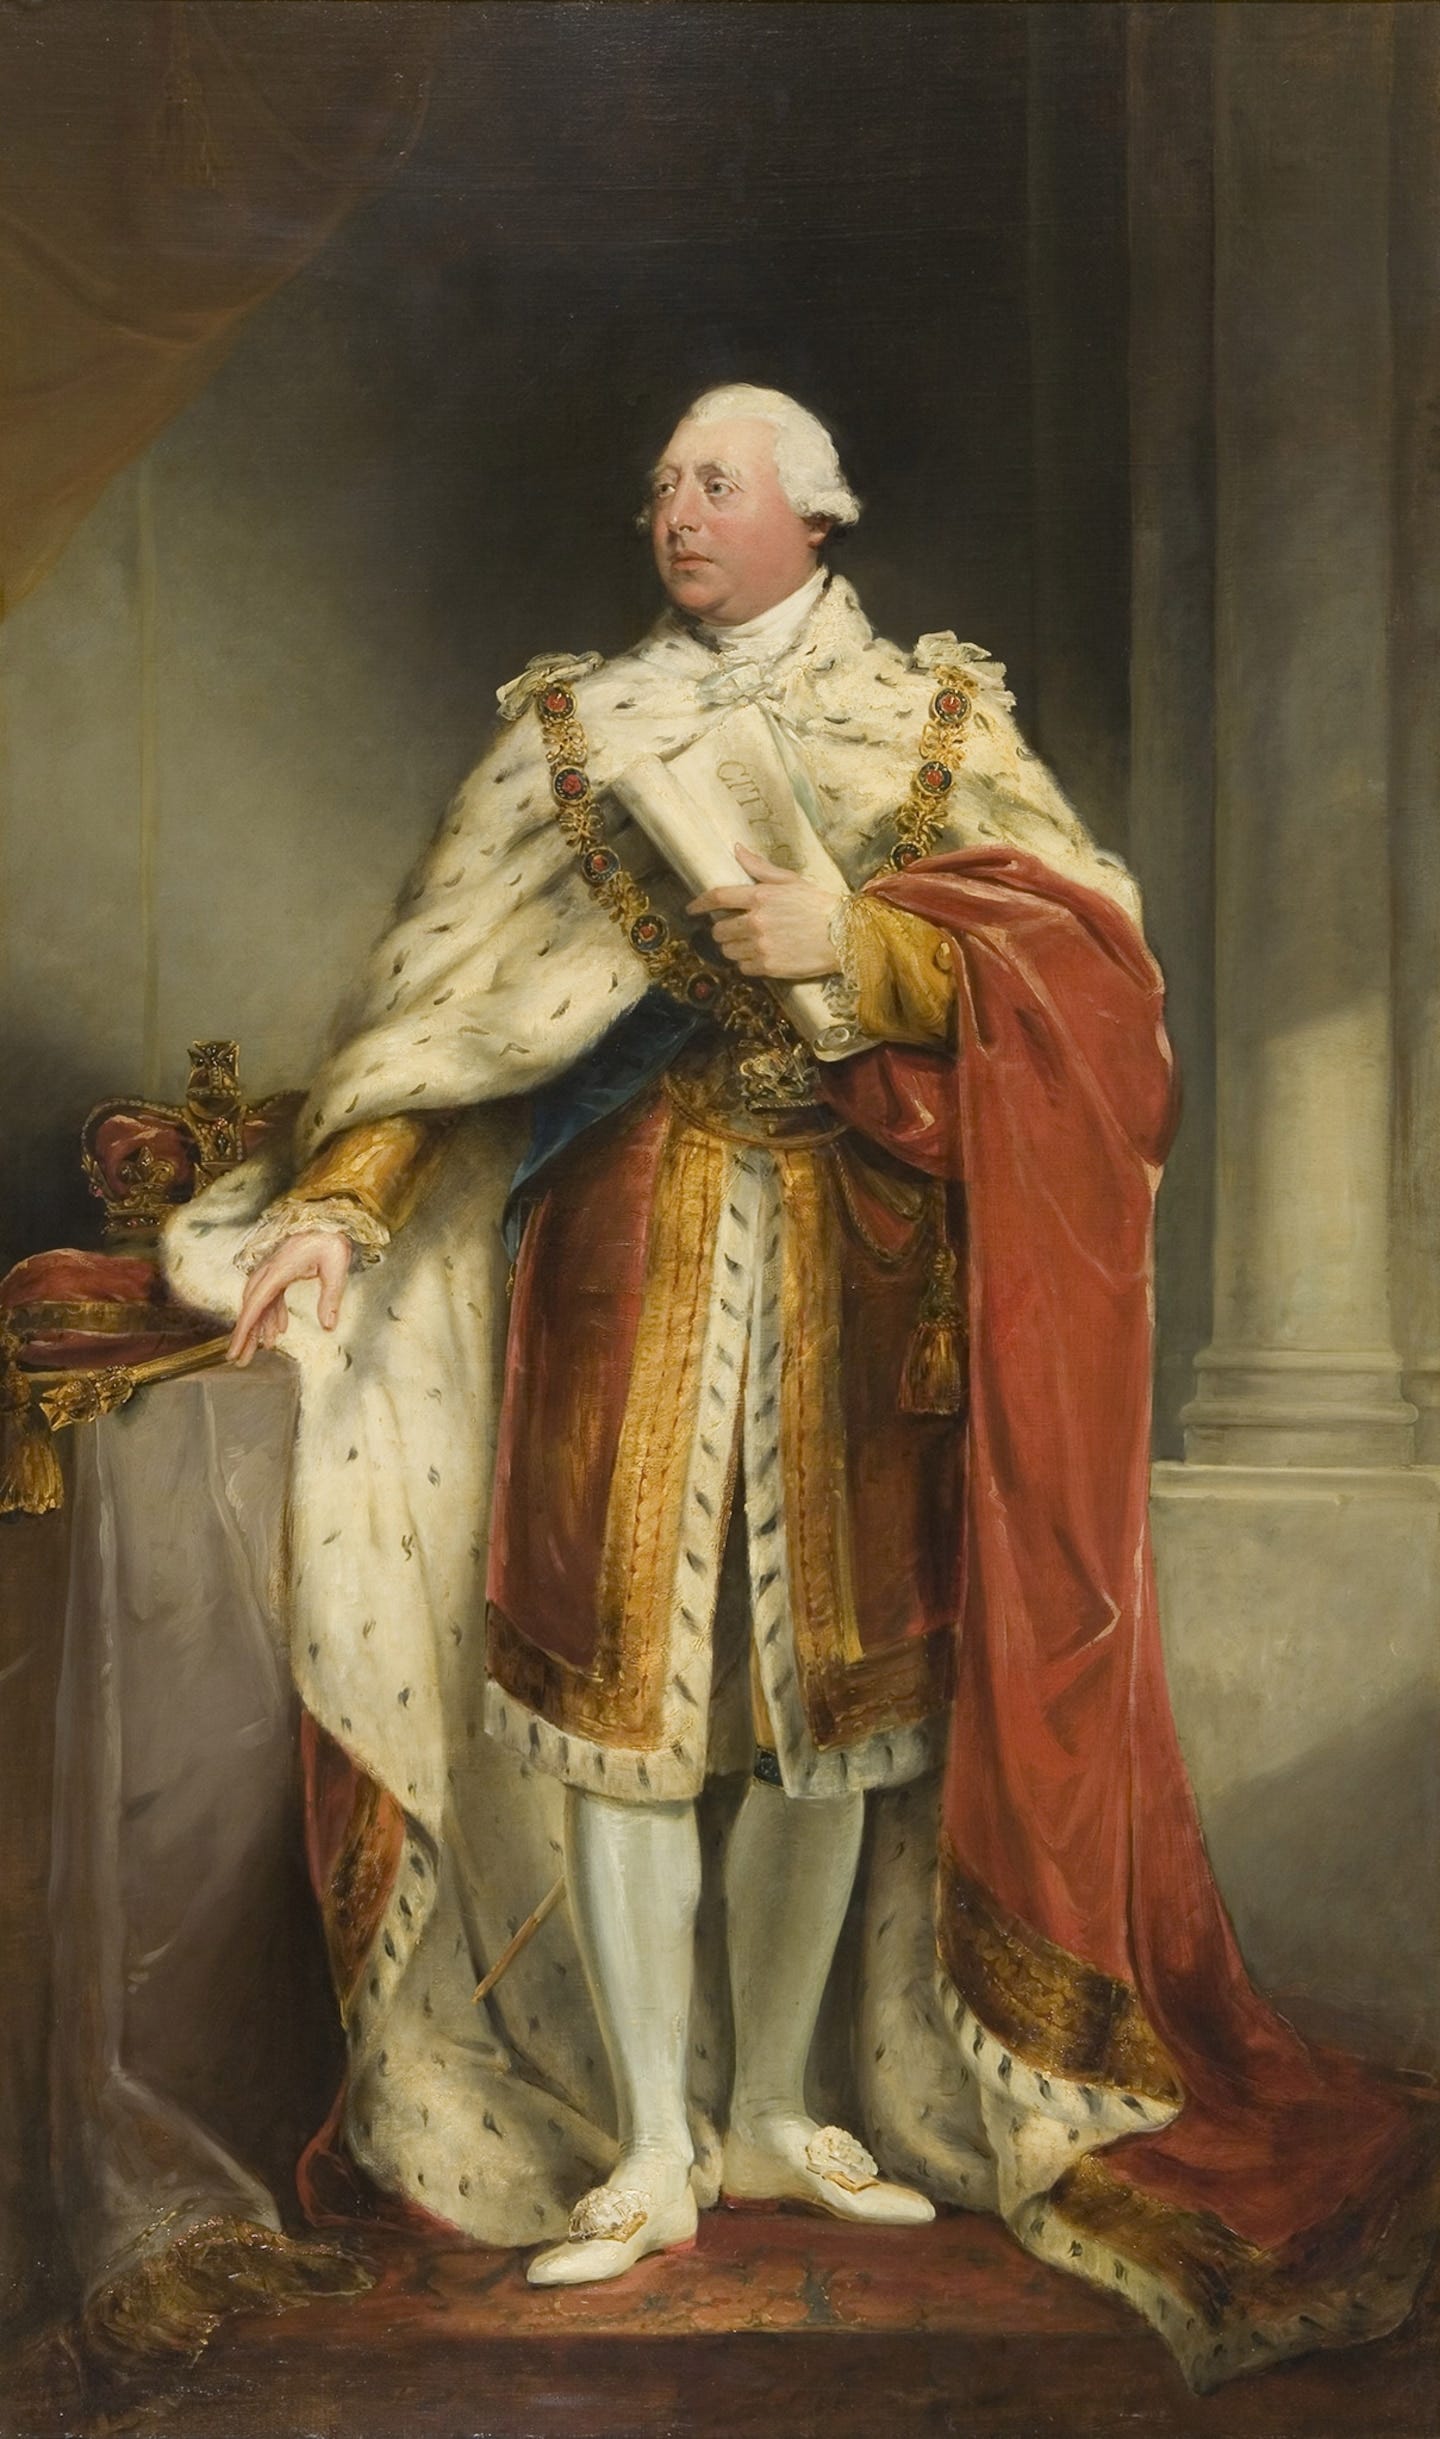 George III: The legacy of the last king of America